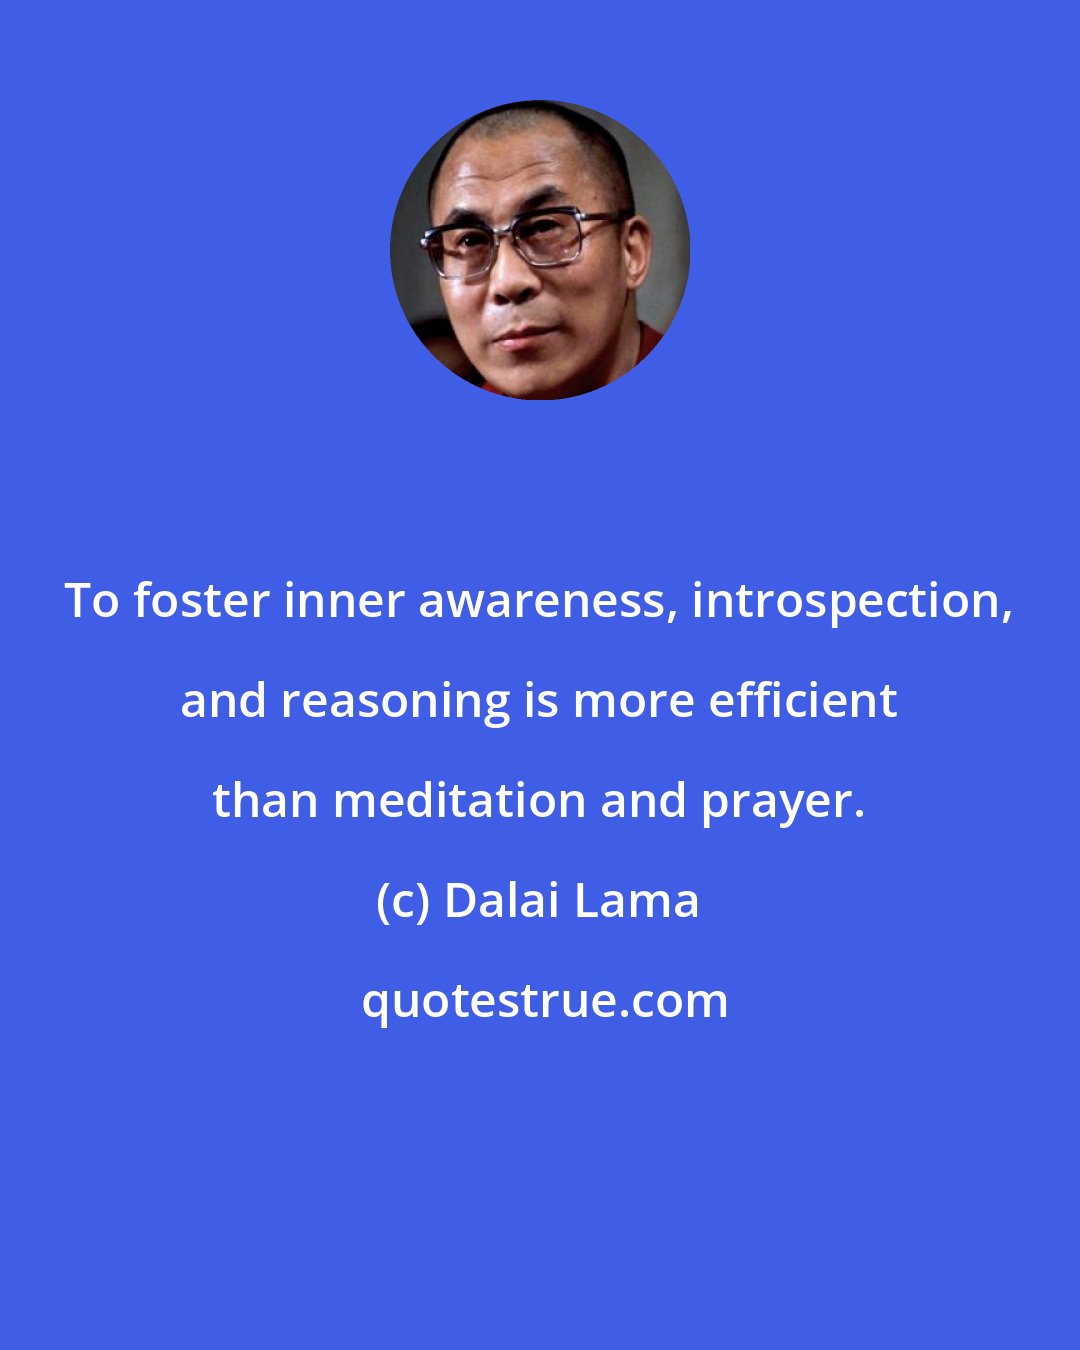 Dalai Lama: To foster inner awareness, introspection, and reasoning is more efficient than meditation and prayer.